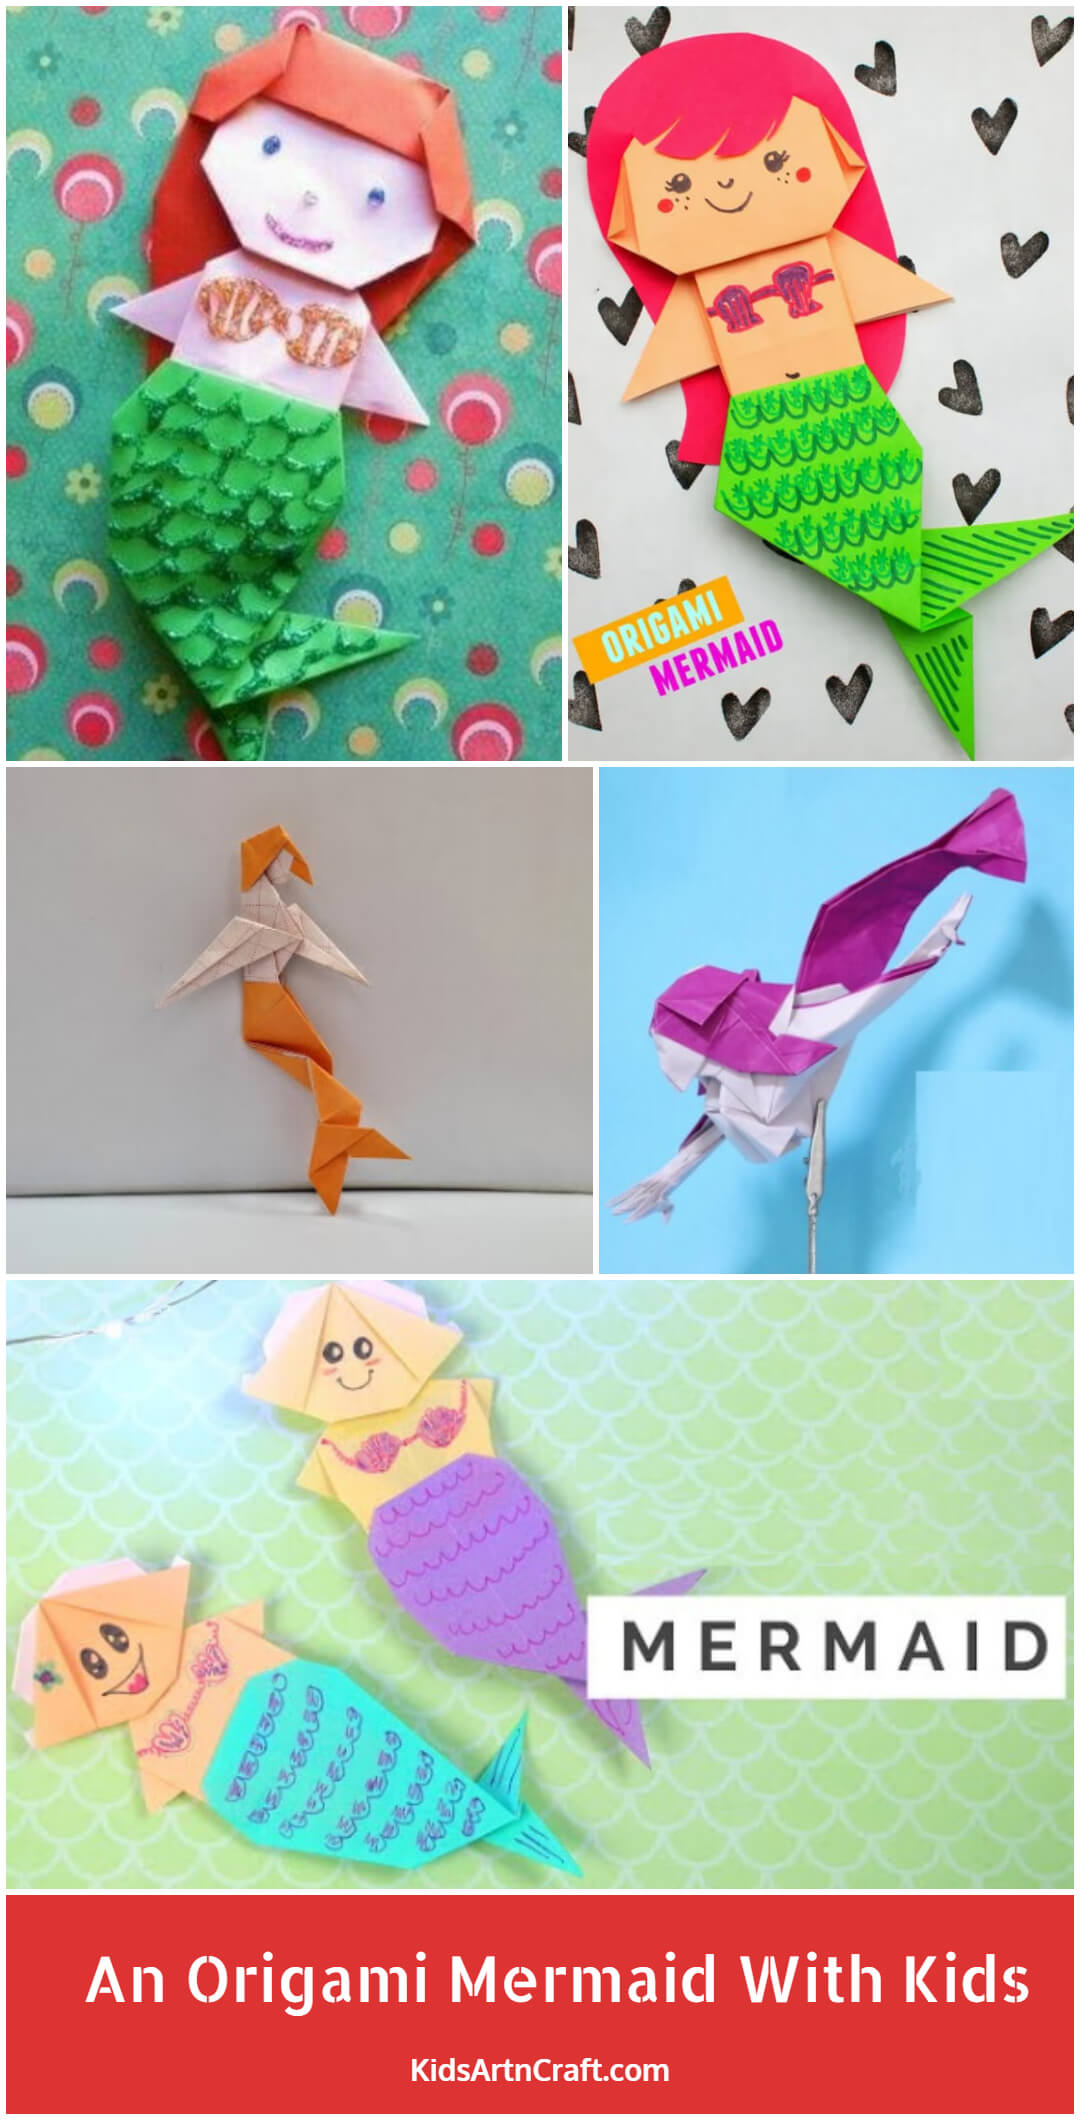 How To Make An Origami Mermaid With Kids